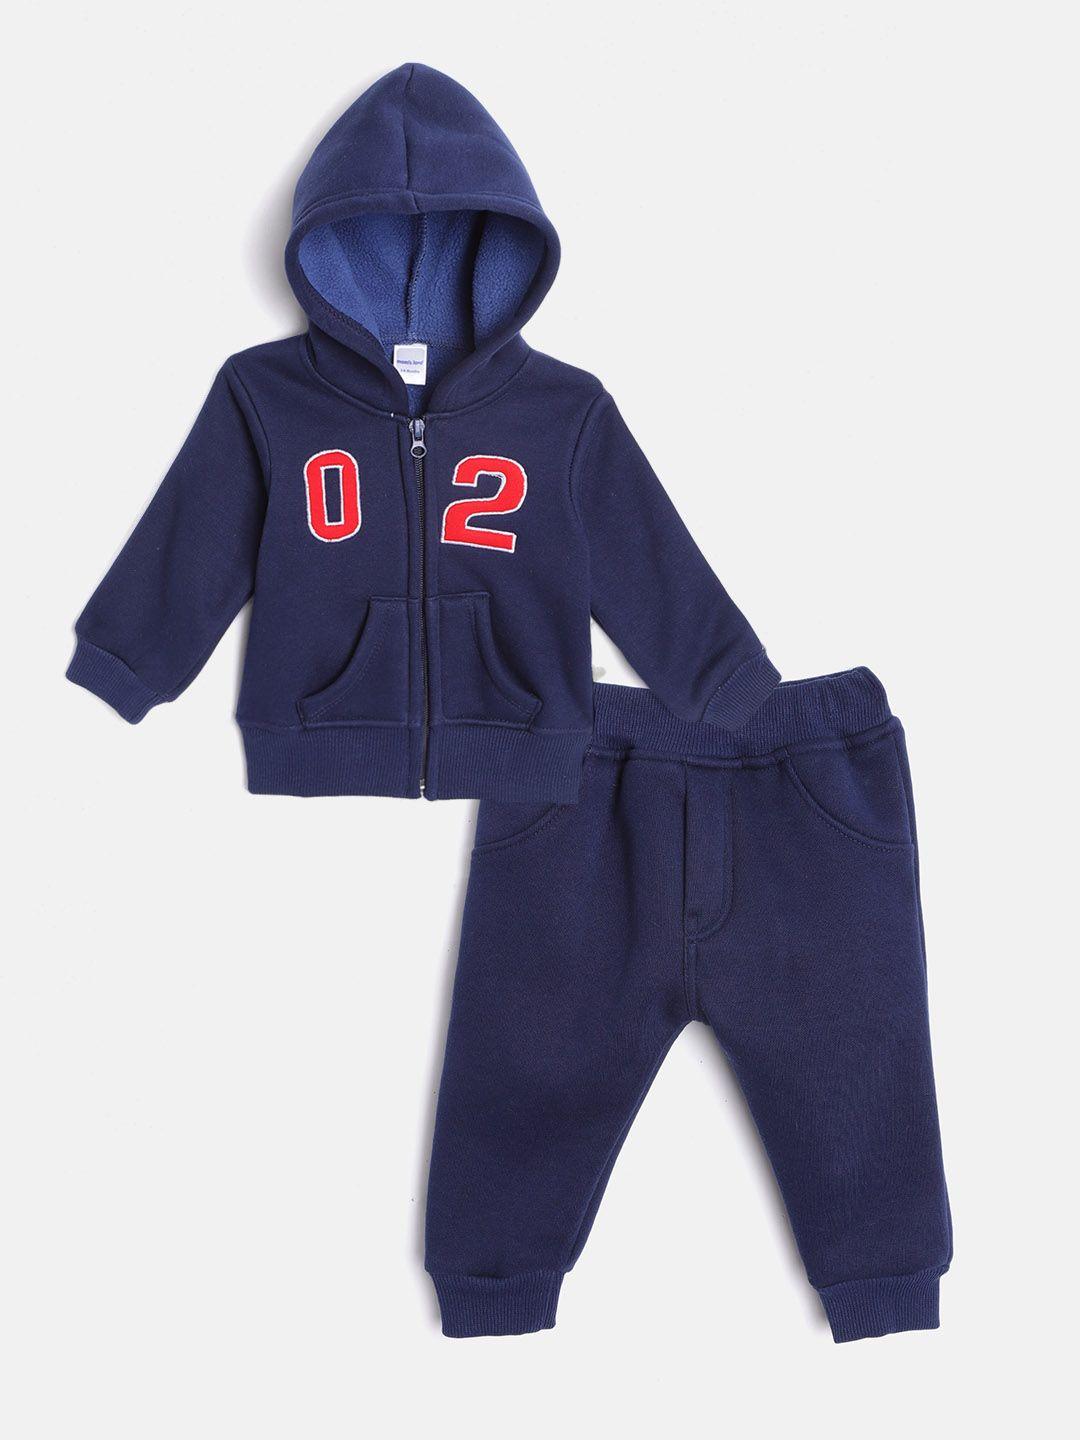 moms love infant boys navy blue & red cotton numeric hooded sweatshirt with pyjamas